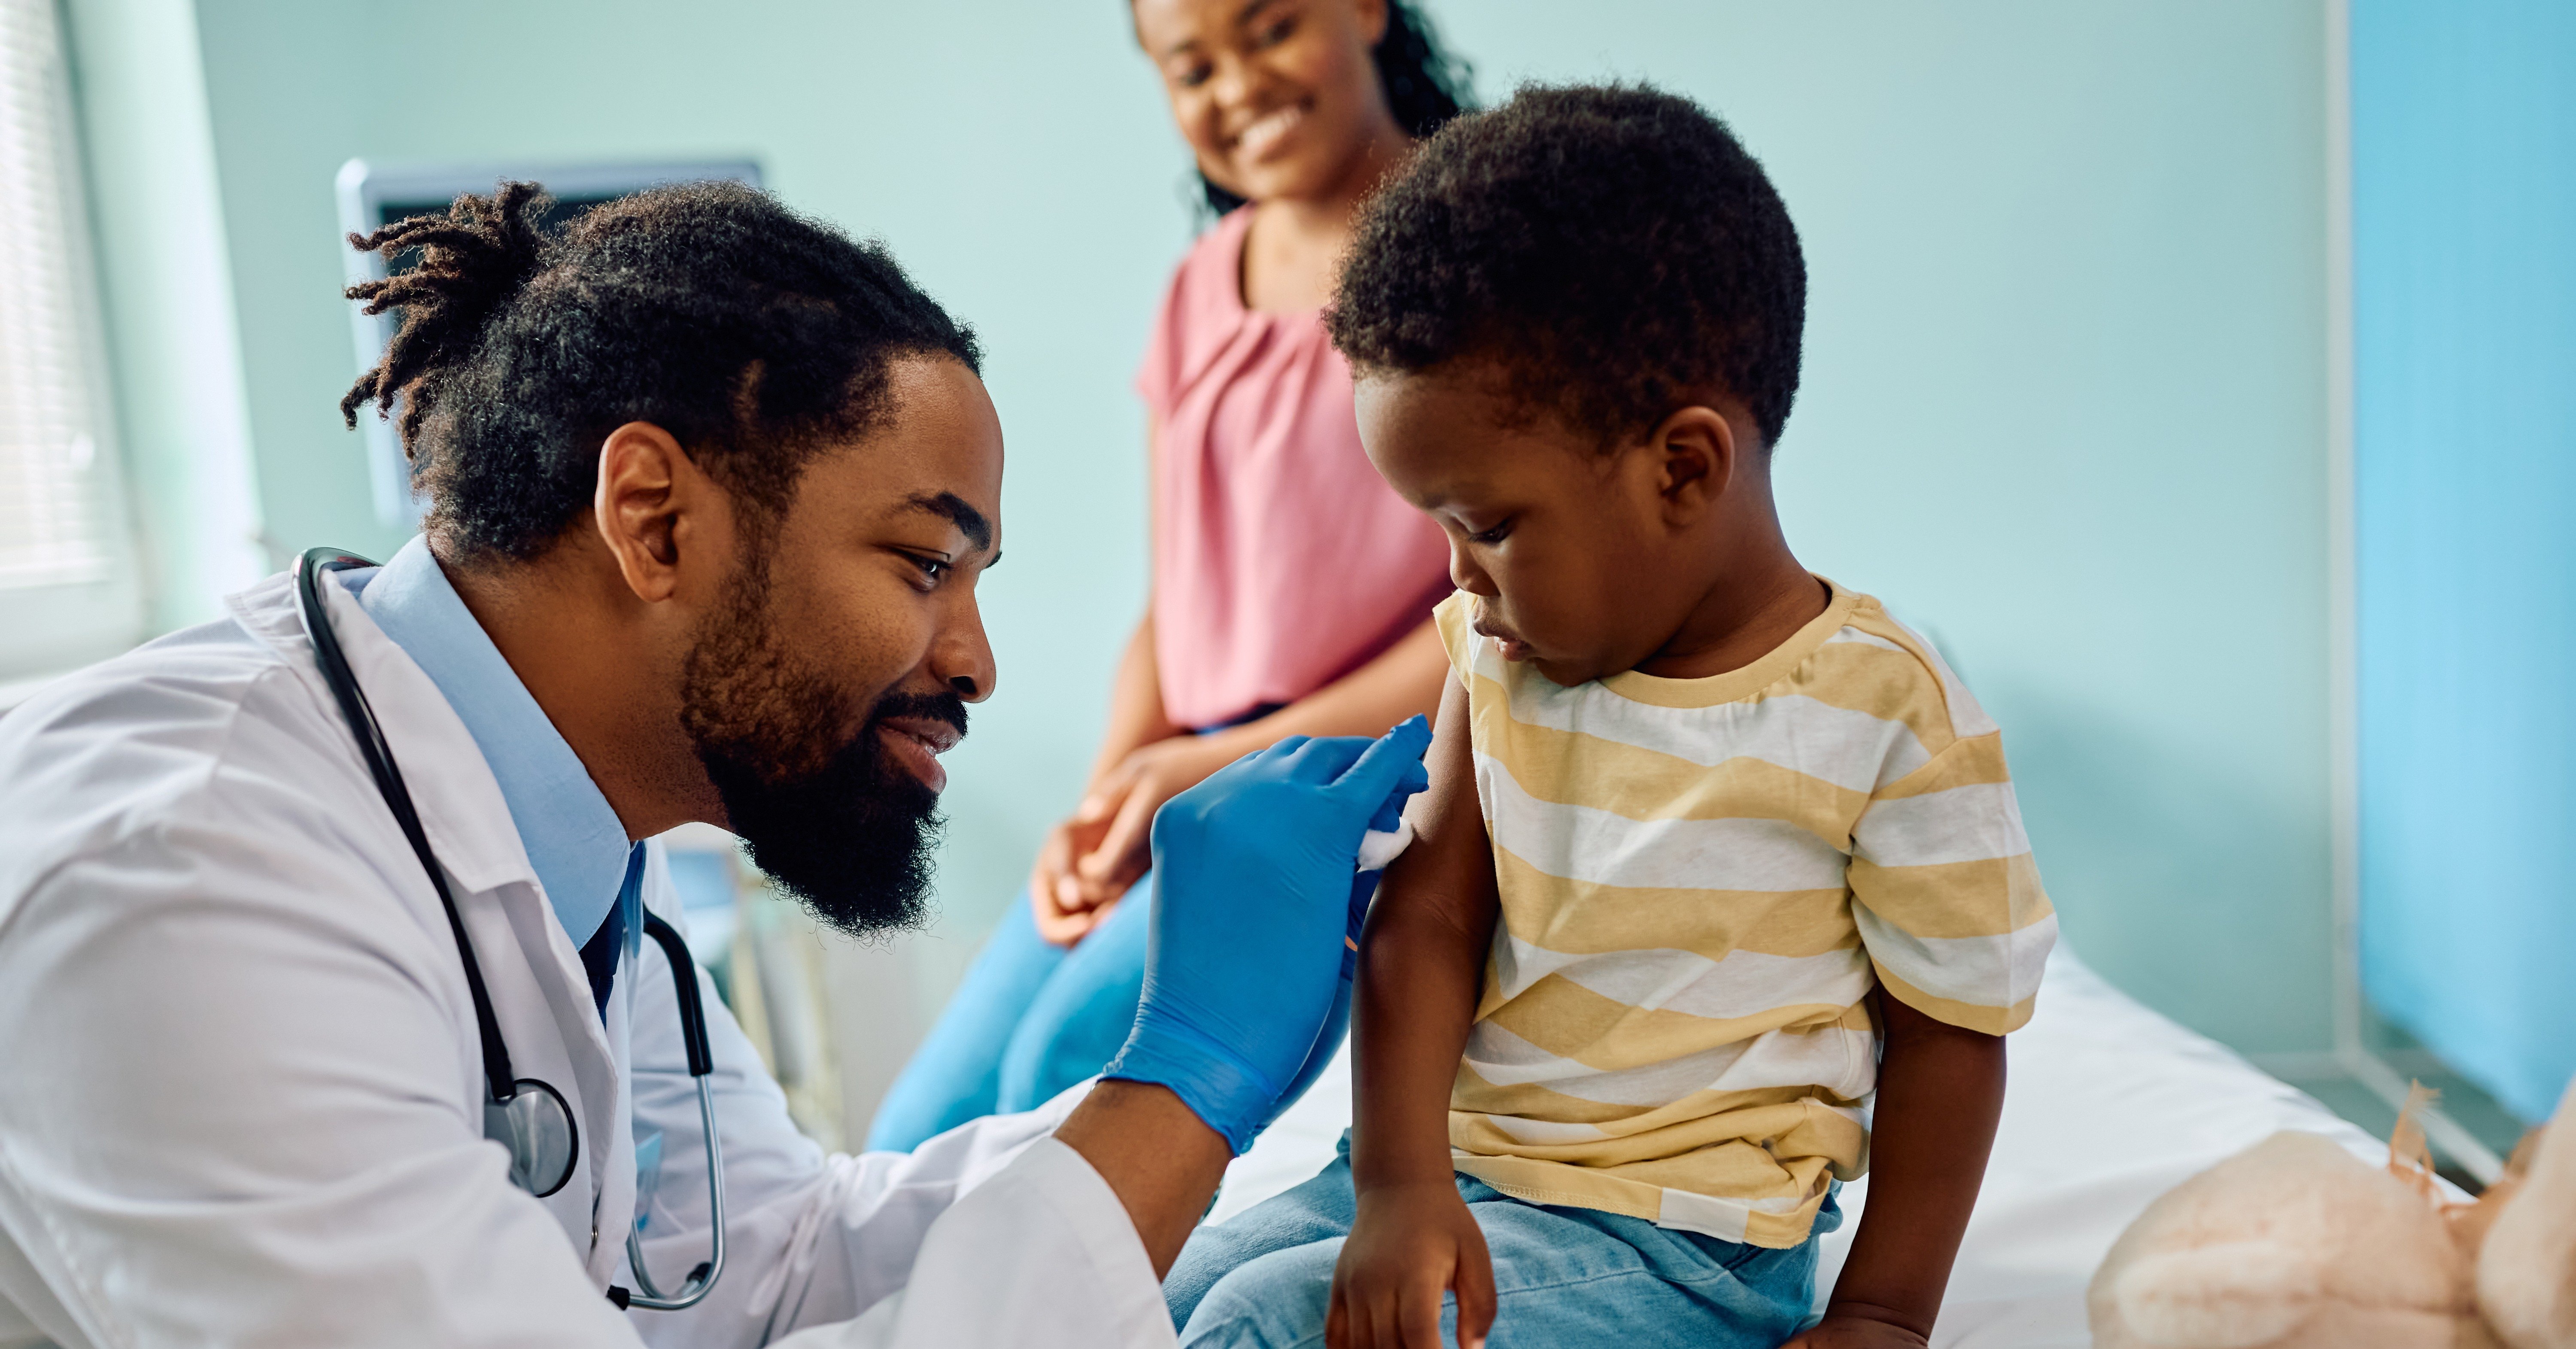 Smiling pediatrician gives a shot to a young child